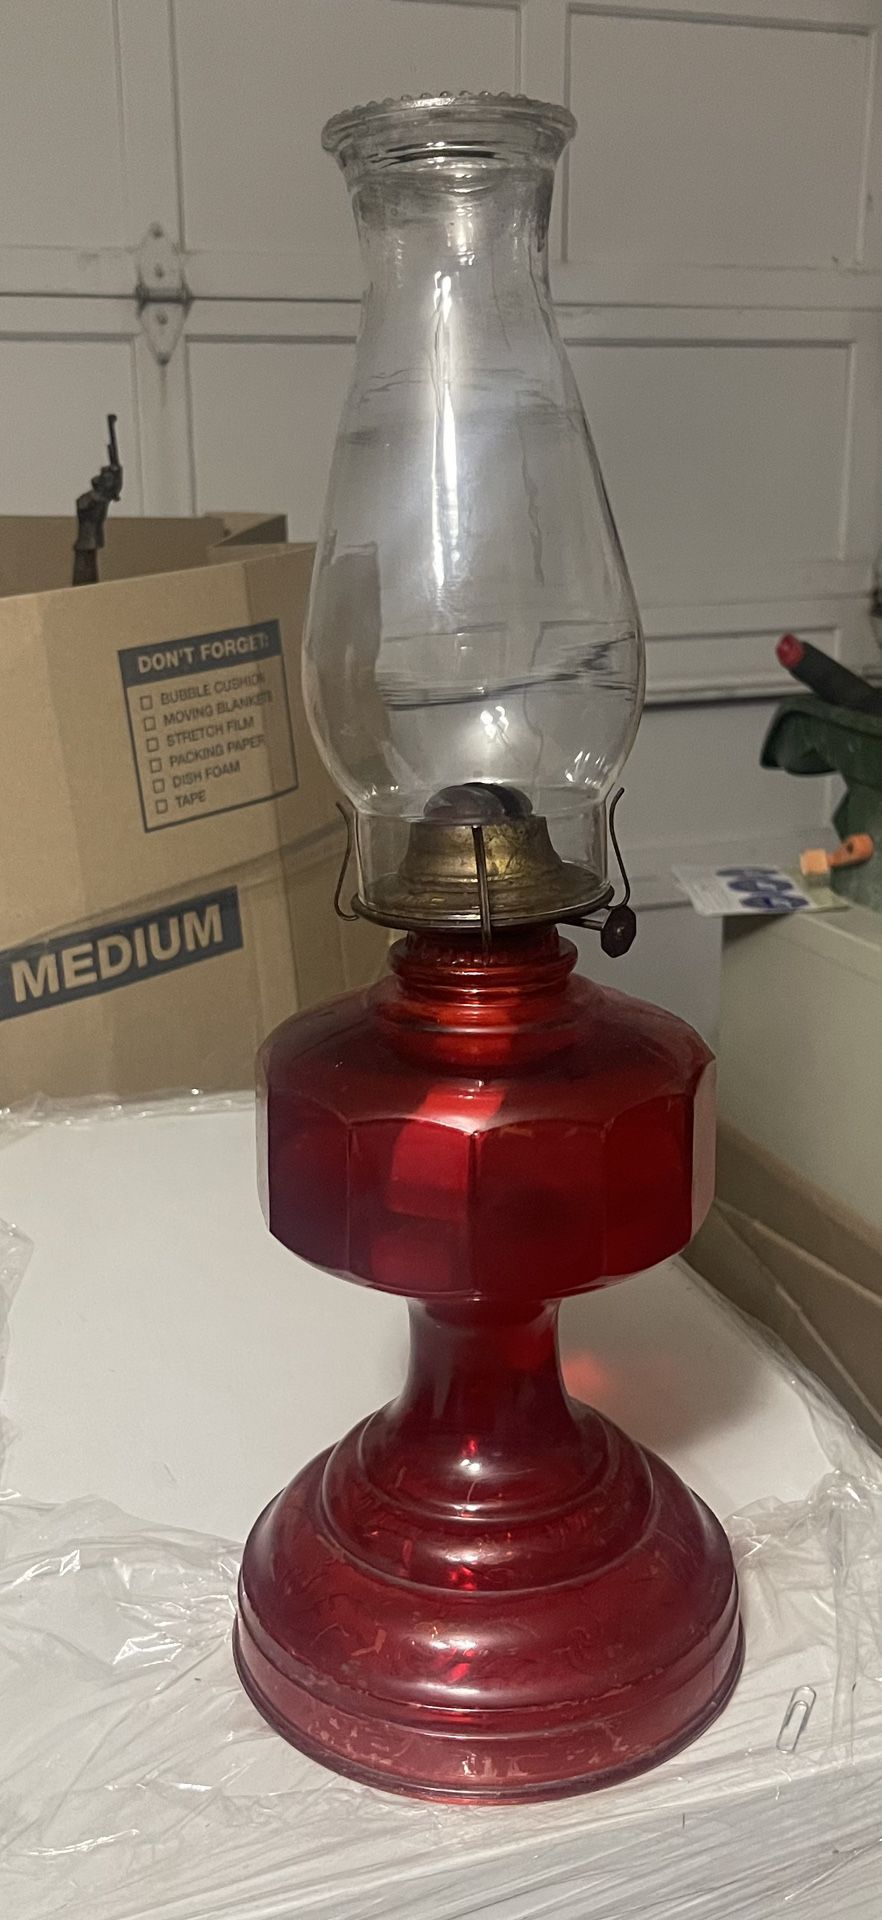  Antique Hurricane Lamp  18 Inches High.  Pick Up Only